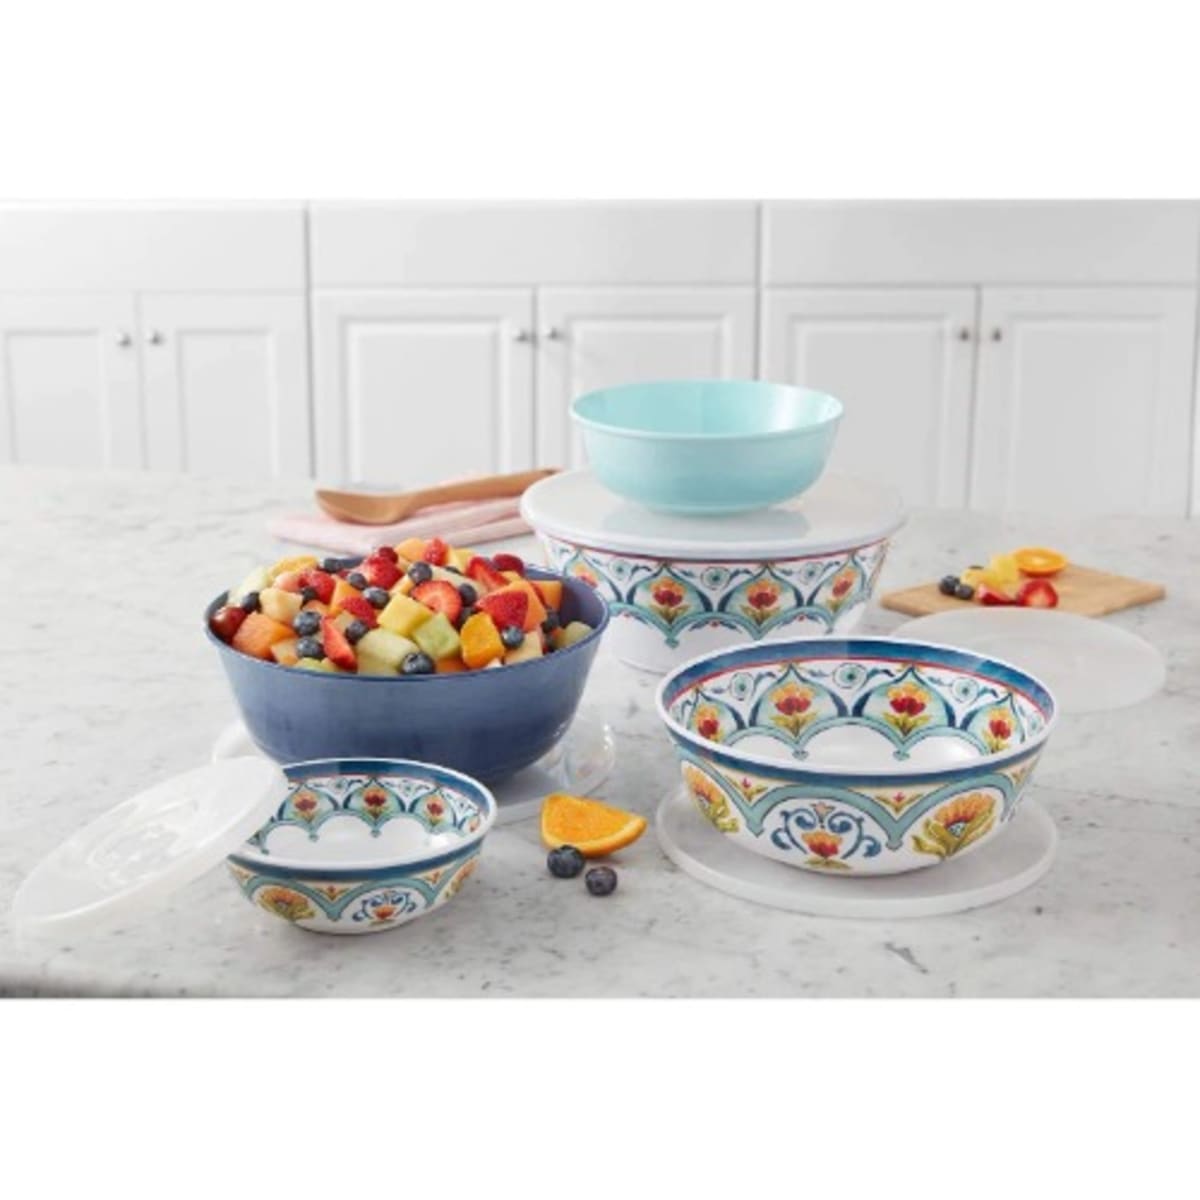  Member's Mark 5-Piece Melamine Mixing Bowl Set with Lids (Karma  Wildflowers): Home & Kitchen